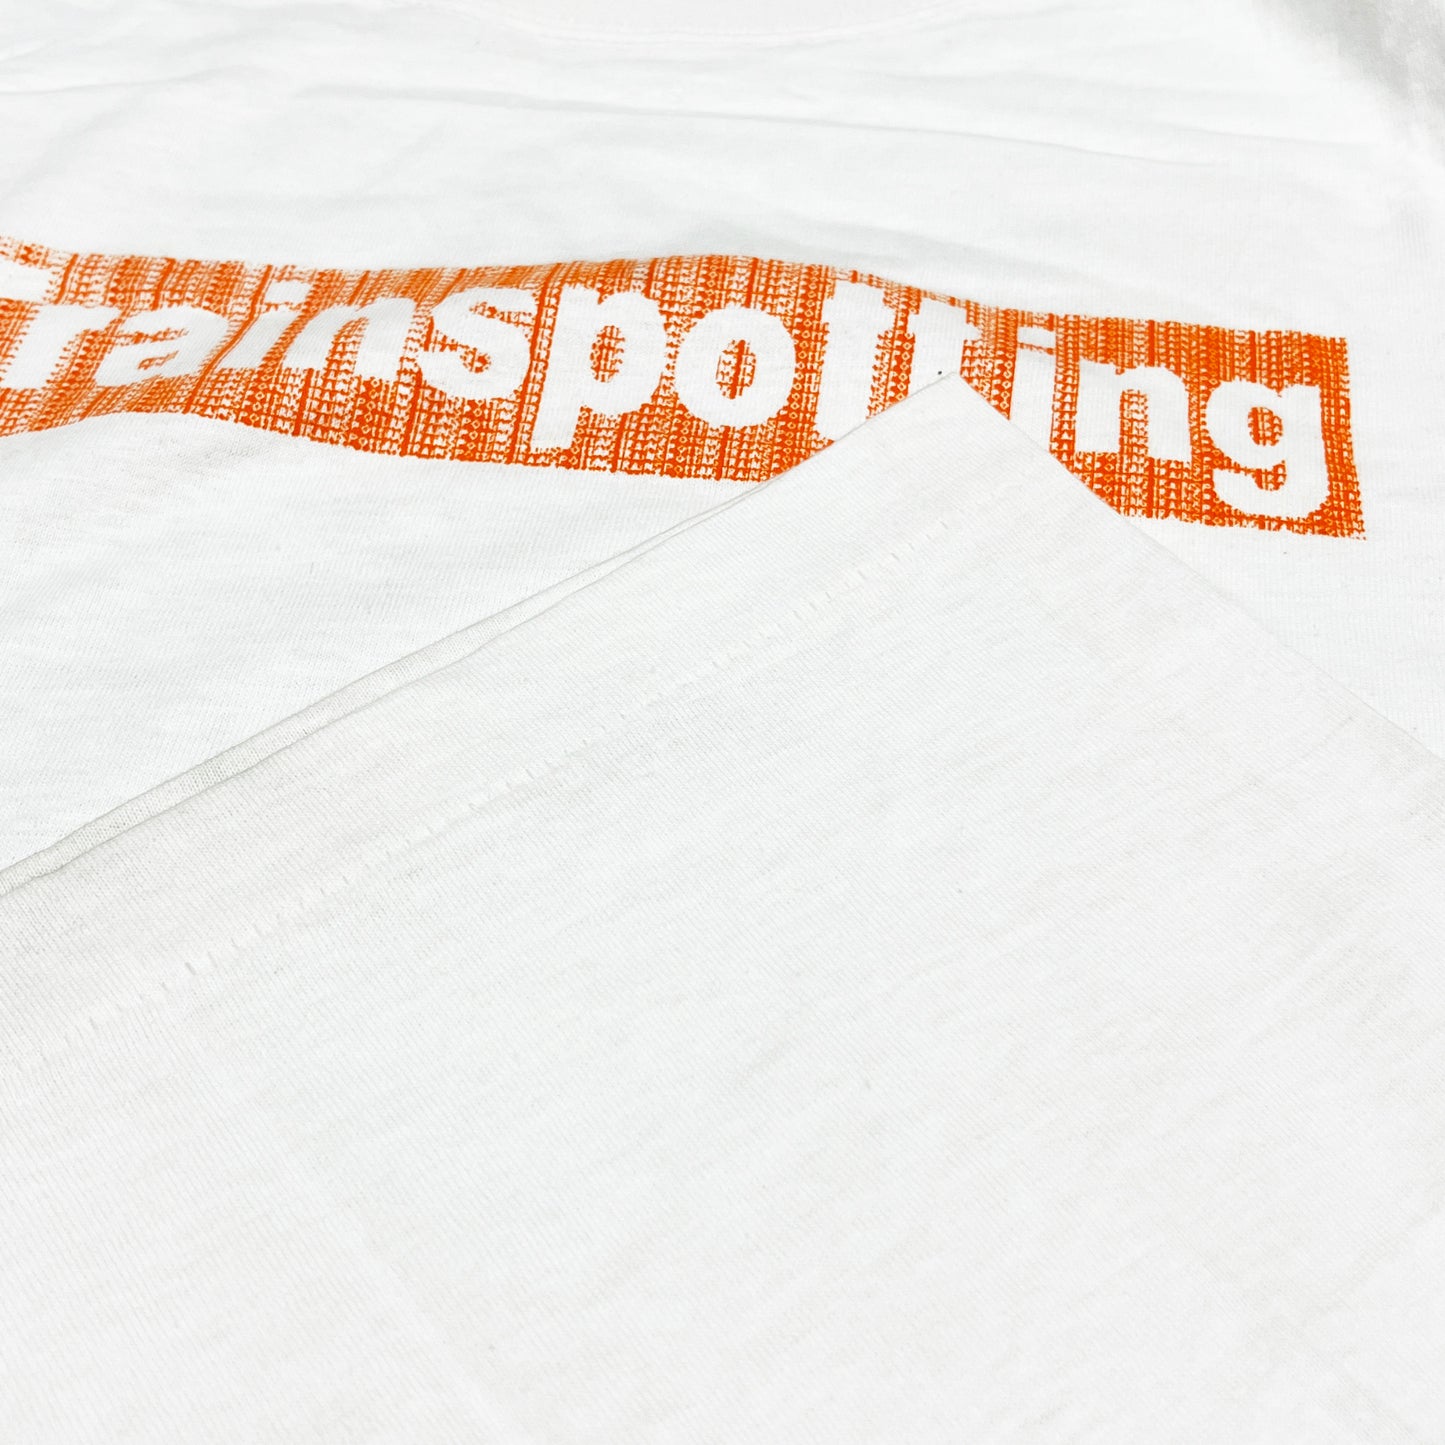 90's AMERICAN STYLE Trainspotting T Size (XL)